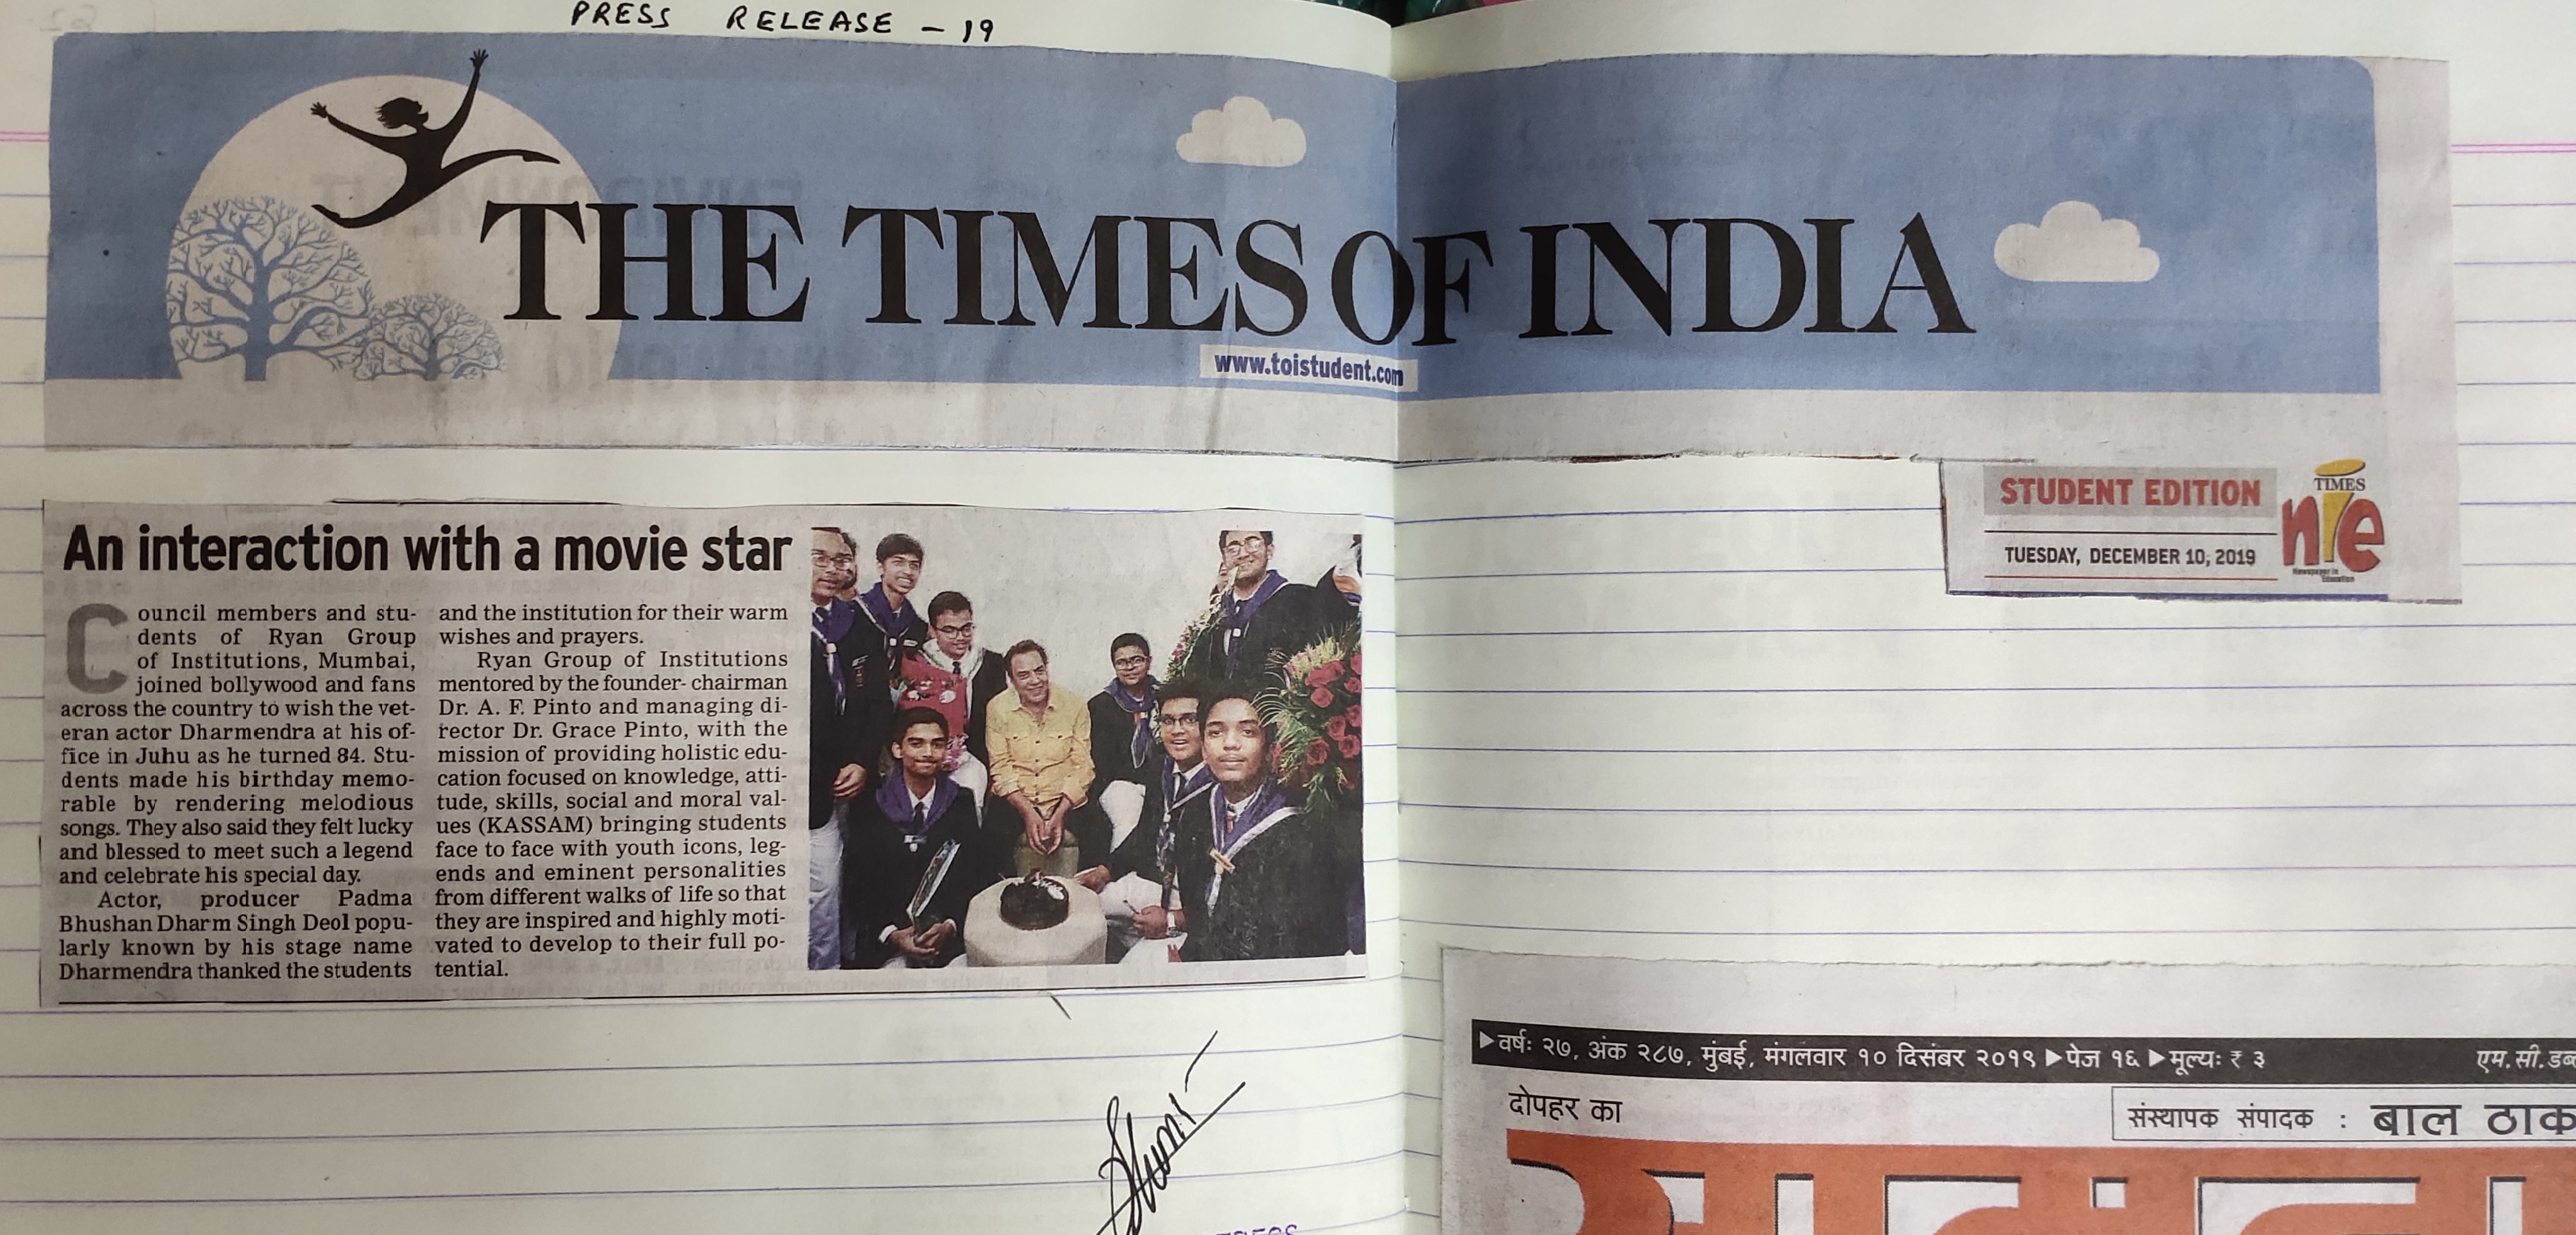 News: An article under the name “Interaction with Movie Star - Dharmendra” was published in the Times of India